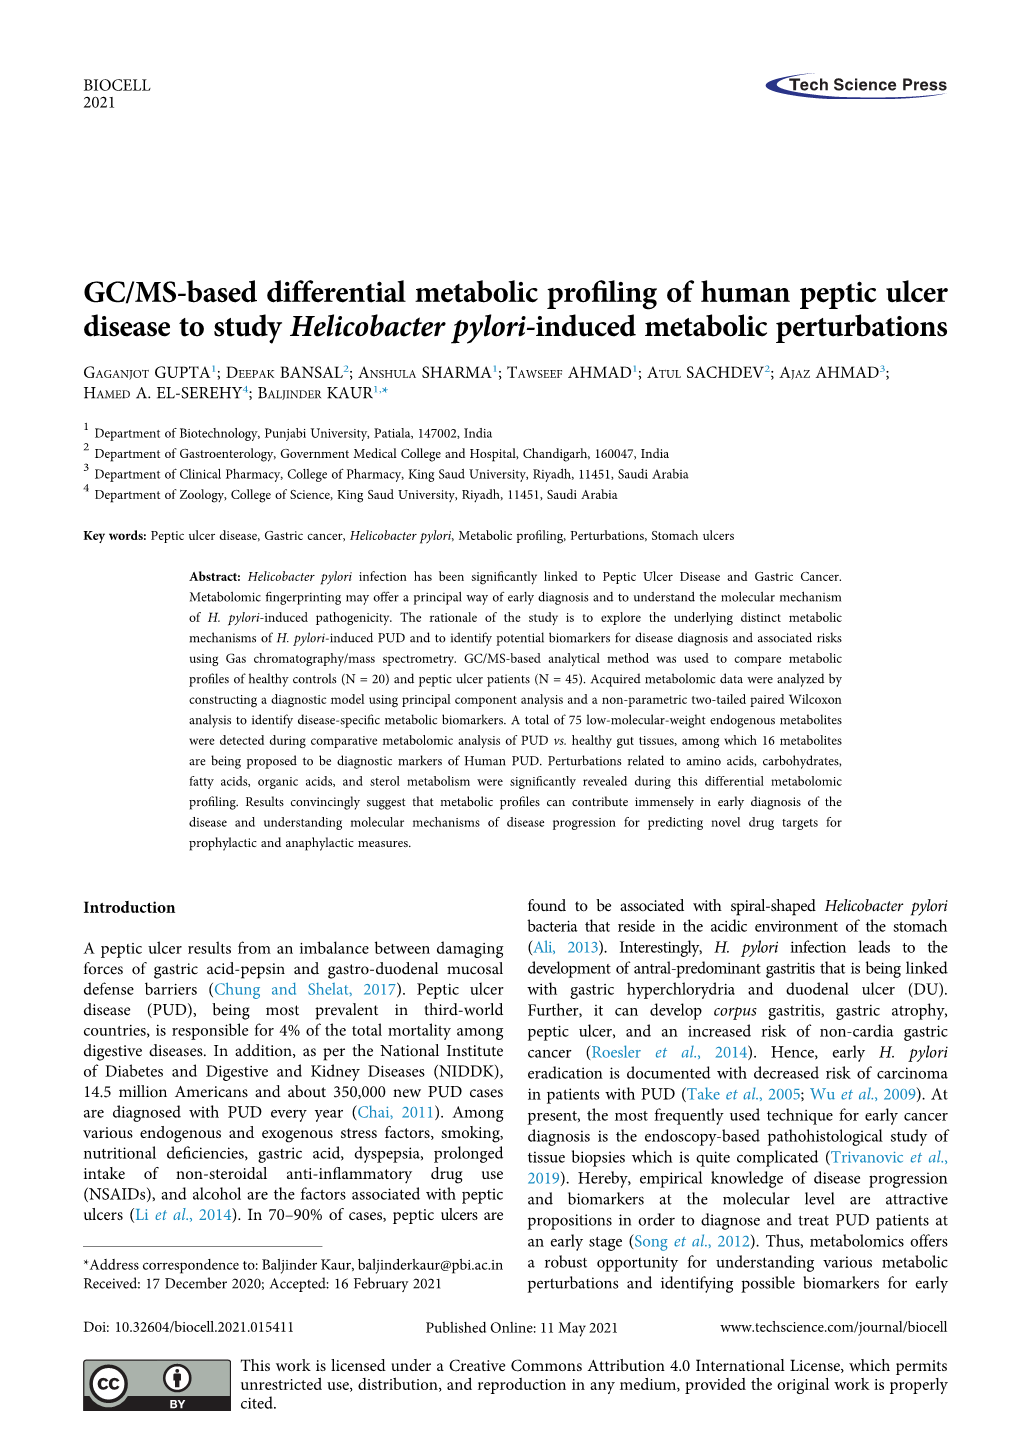 GC/MS-Based Differential Metabolic Profiling of Human Peptic Ulcer Disease to Study Helicobacter Pylori-Induced Metabolic Pertur